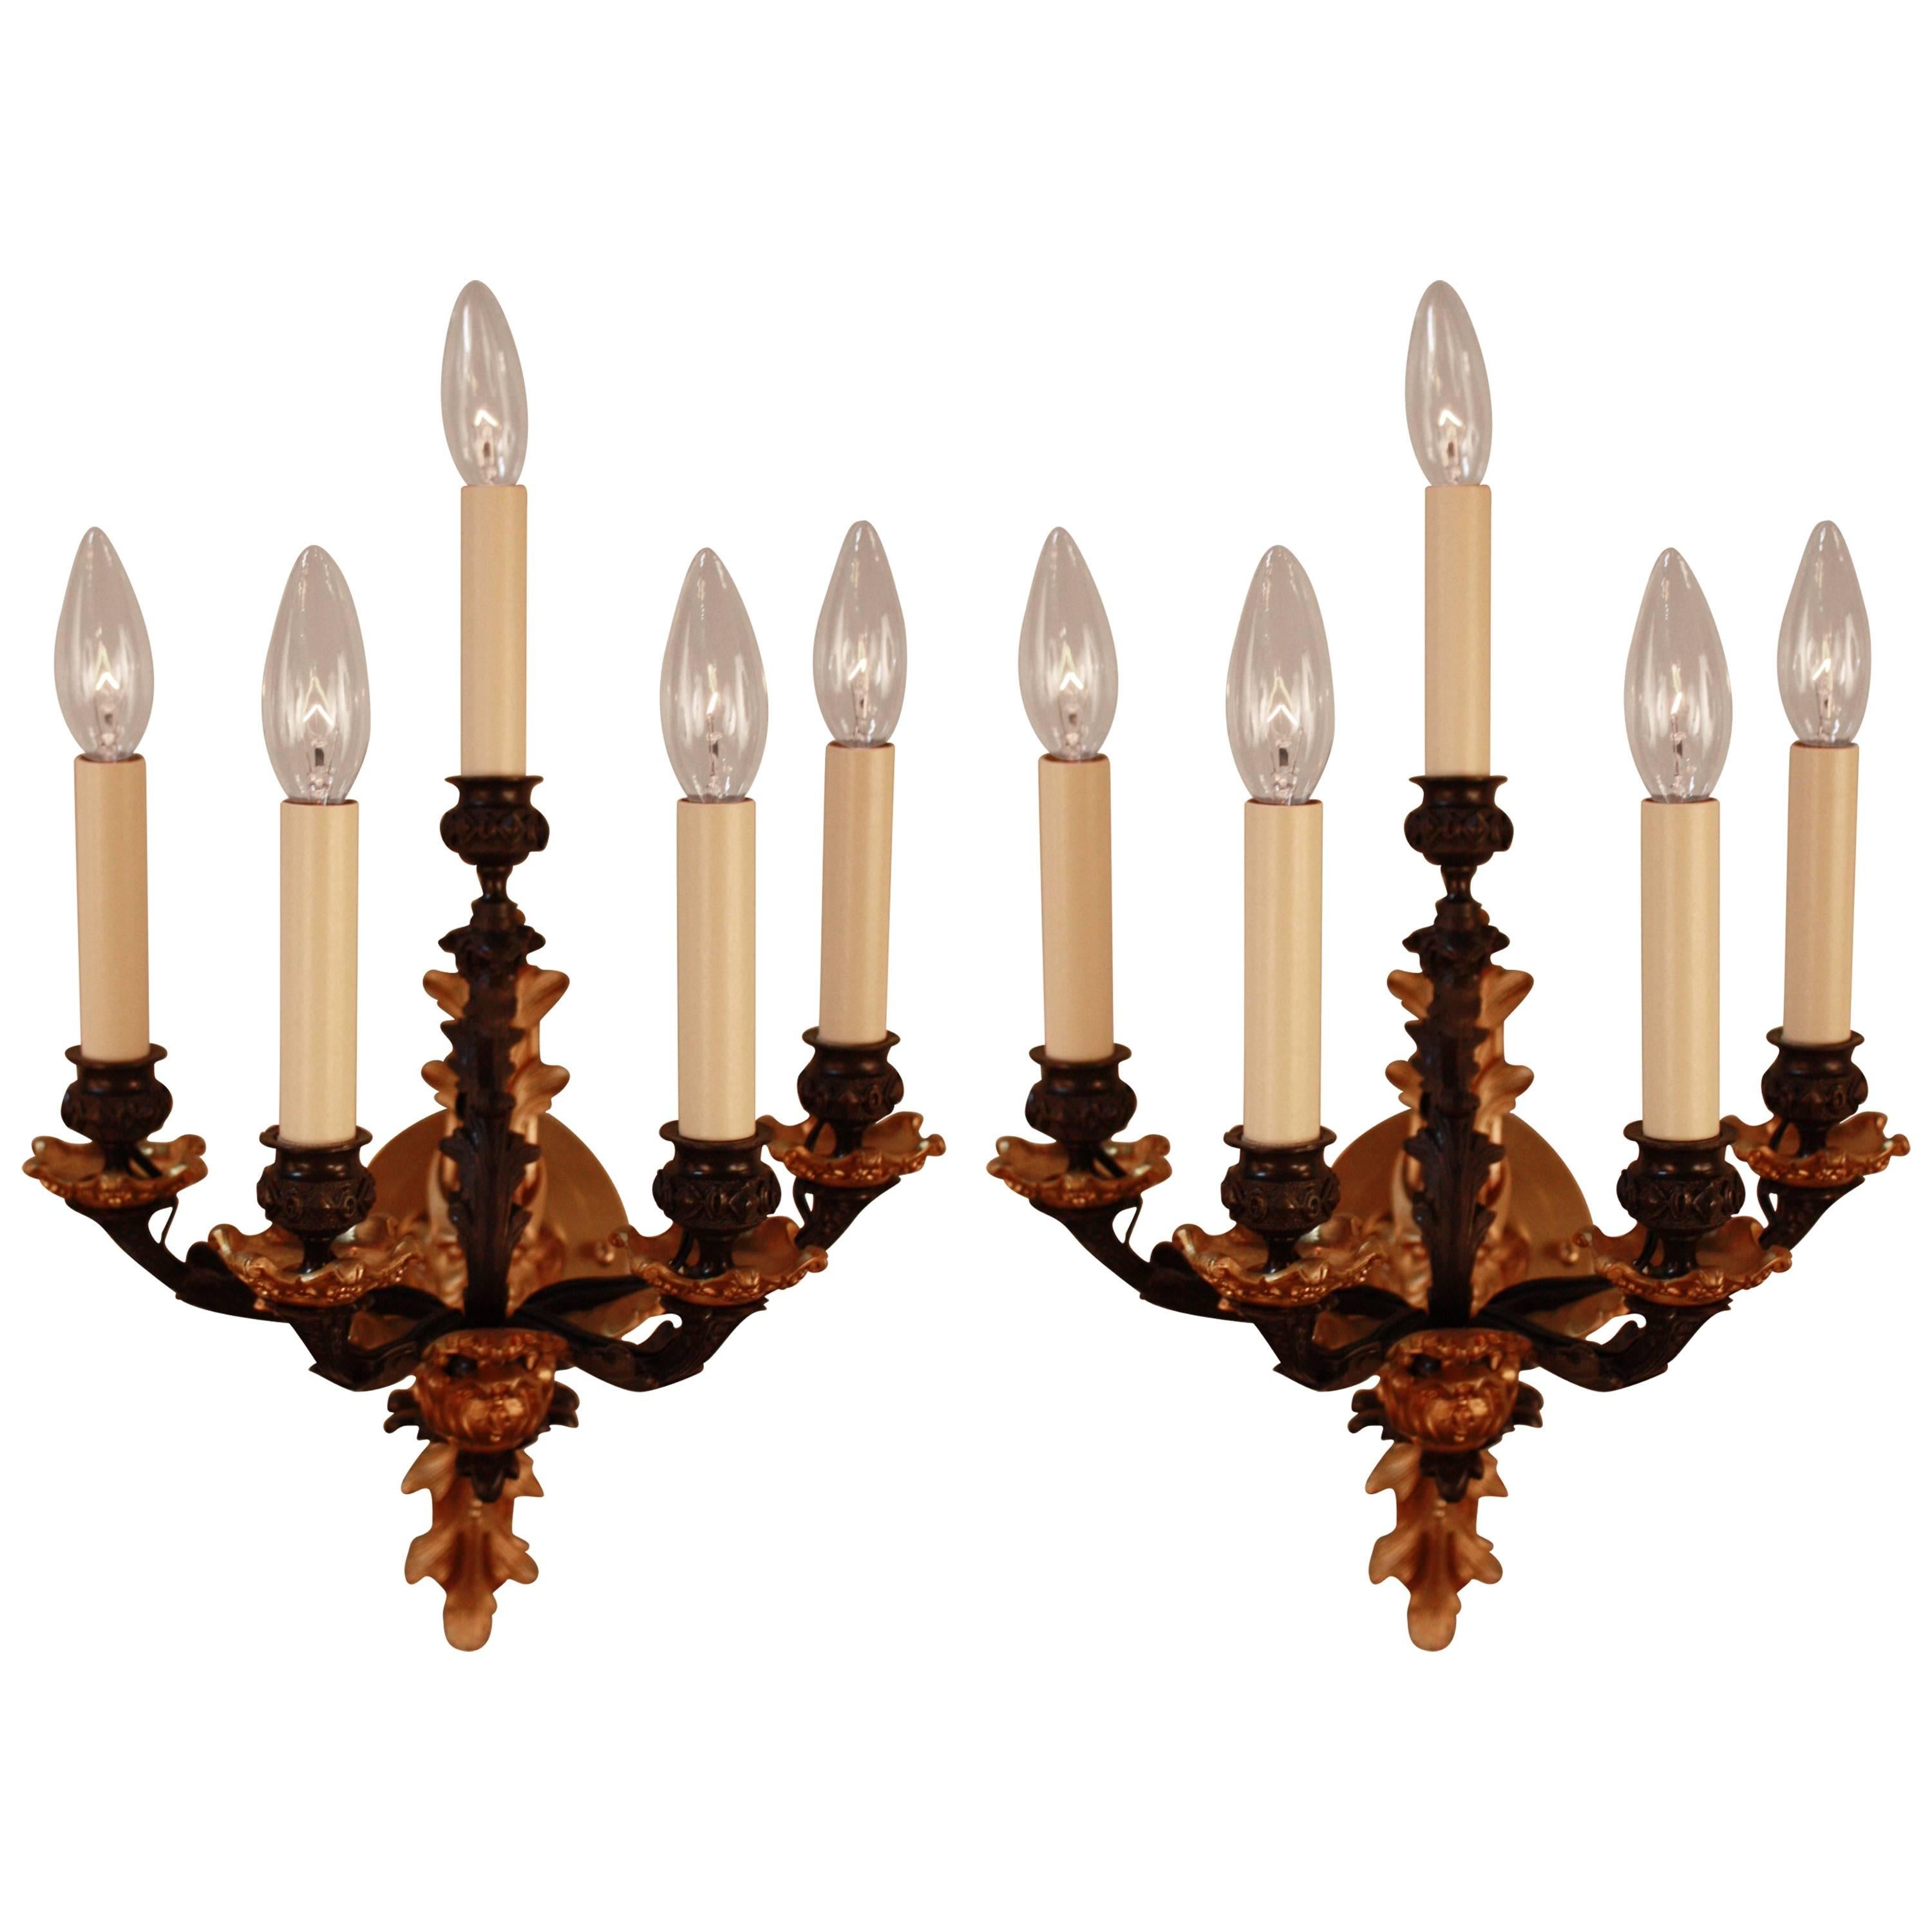 Pair of 19th Century French Empire Style Bronze Wall Sconces